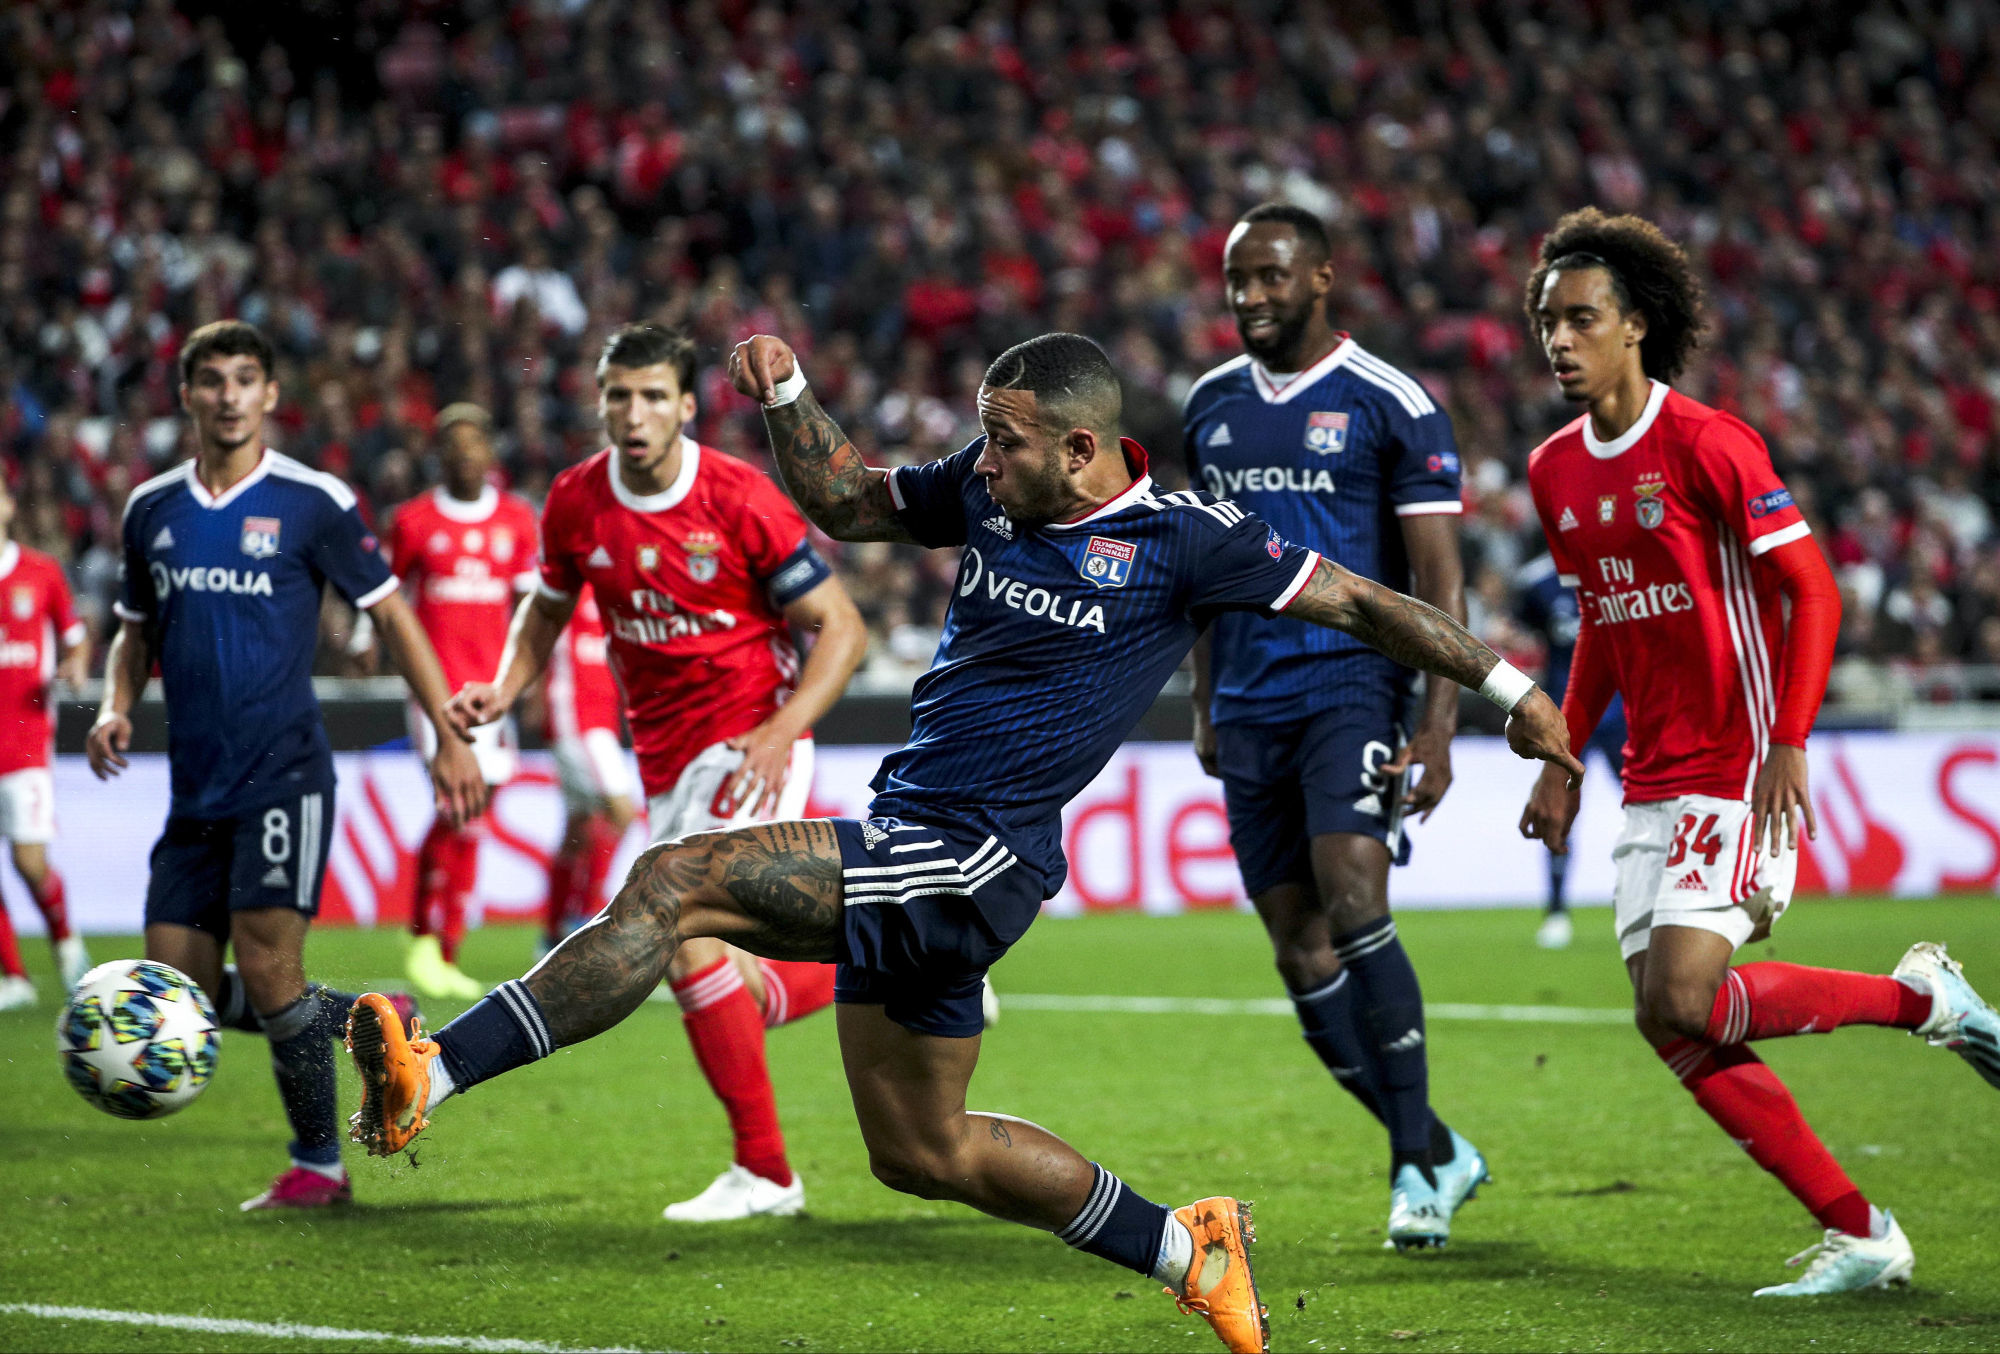 Lisbon, 10/23/2019 - Sport Lisboa e Benfica hosted Olympique Lyonnais tonight at the Estádio da Luz in Lisbon, in a match counting for the third round of the 2019/20 Champions League group stage. Memphis Depay Goal (1-1) (Filipe Amorim / Global Images) 

Photo by Icon Sport - Memphis DEPAY - Estàdio da Luz - Lisbonne (Portugal)